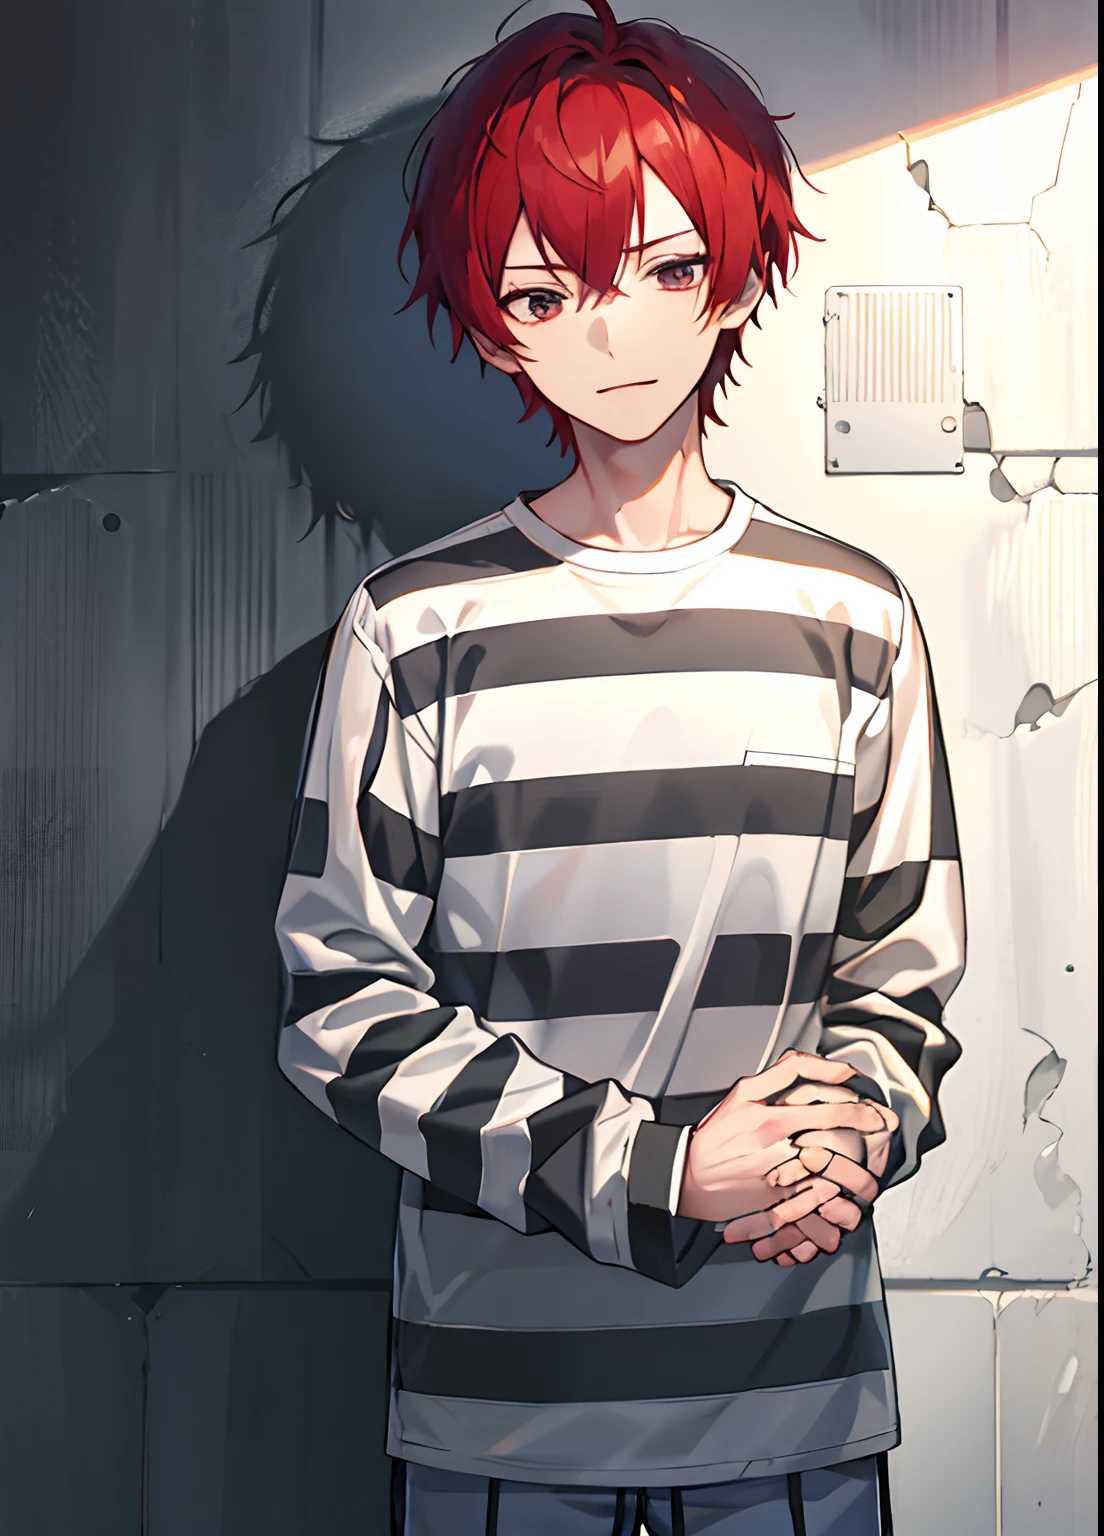 1boy, Handsome man,  Solo,Very short red hair, red hair, up looking_で_viewer, ((masutepiece,Best Quality)), Beautiful detailed eyes, beautifull detailed face、Sleepy face、sleepy expression、A slight smile, (((priclothes))), (((striped clothes))), shirt, outfit, (long sleeves), prisoner, clothes, clothing, black and white stripes, prison cell, young